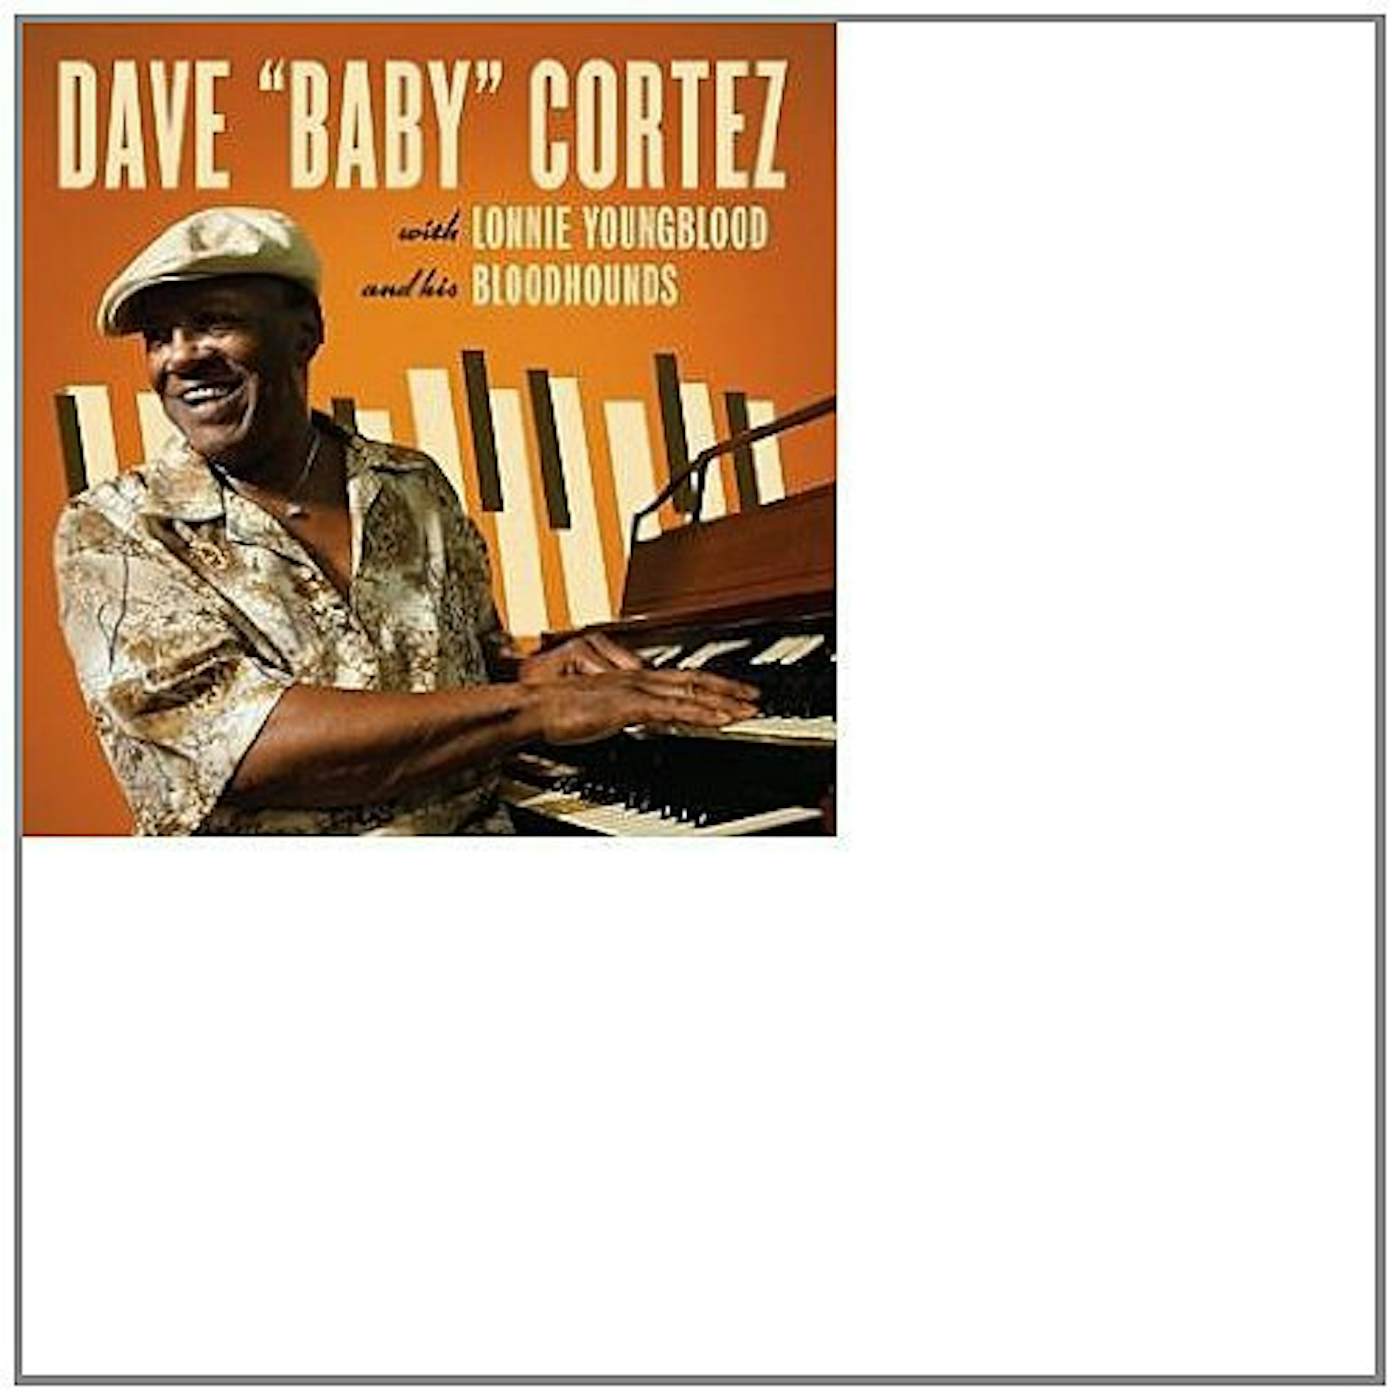 Dave "Baby" Cortez WITH LONNIE YOUNGBLOOD & HIS Vinyl Record